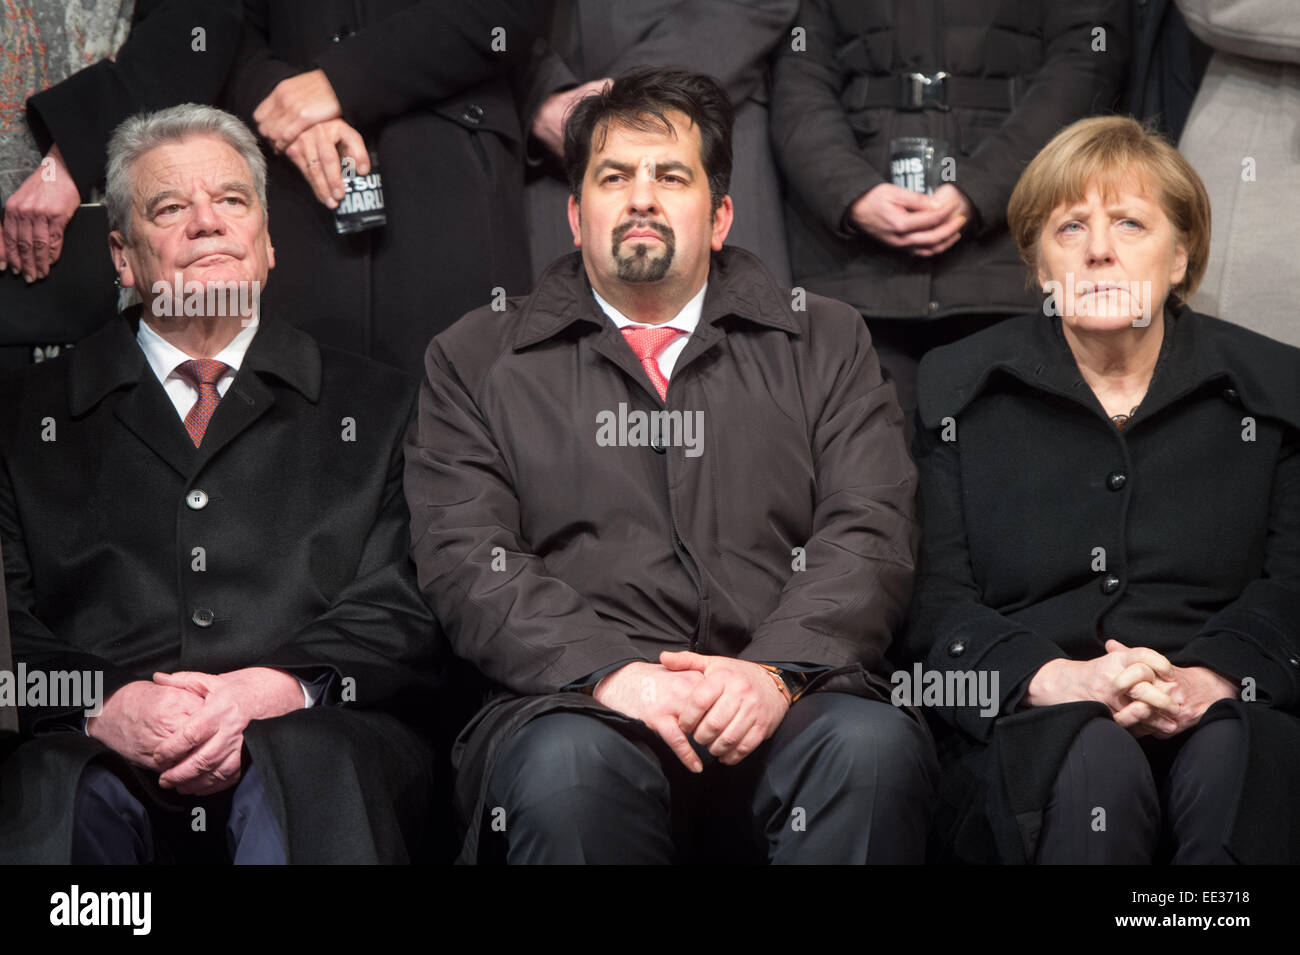 Berlin, Germany. 13th Jan, 2015. German President Joachim Gauck (L-R), chairman of the Central Committee of Muslims in Germany, Aiman Mazyek, and Chancellor Angela Merkel during a vigil for the victims of the attacks in France at the Brandenburg Gate in Berlin, Germany, 13 January 2015. The Central Committee of Muslims and the Turkish community have invoked the slogan 'Stand together - Show face' for the rally against Islamist terror and for the peaceful co-existence of the religions. Photo: MAURIZIO GAMBARINI/dpa/Alamy Live News Stock Photo